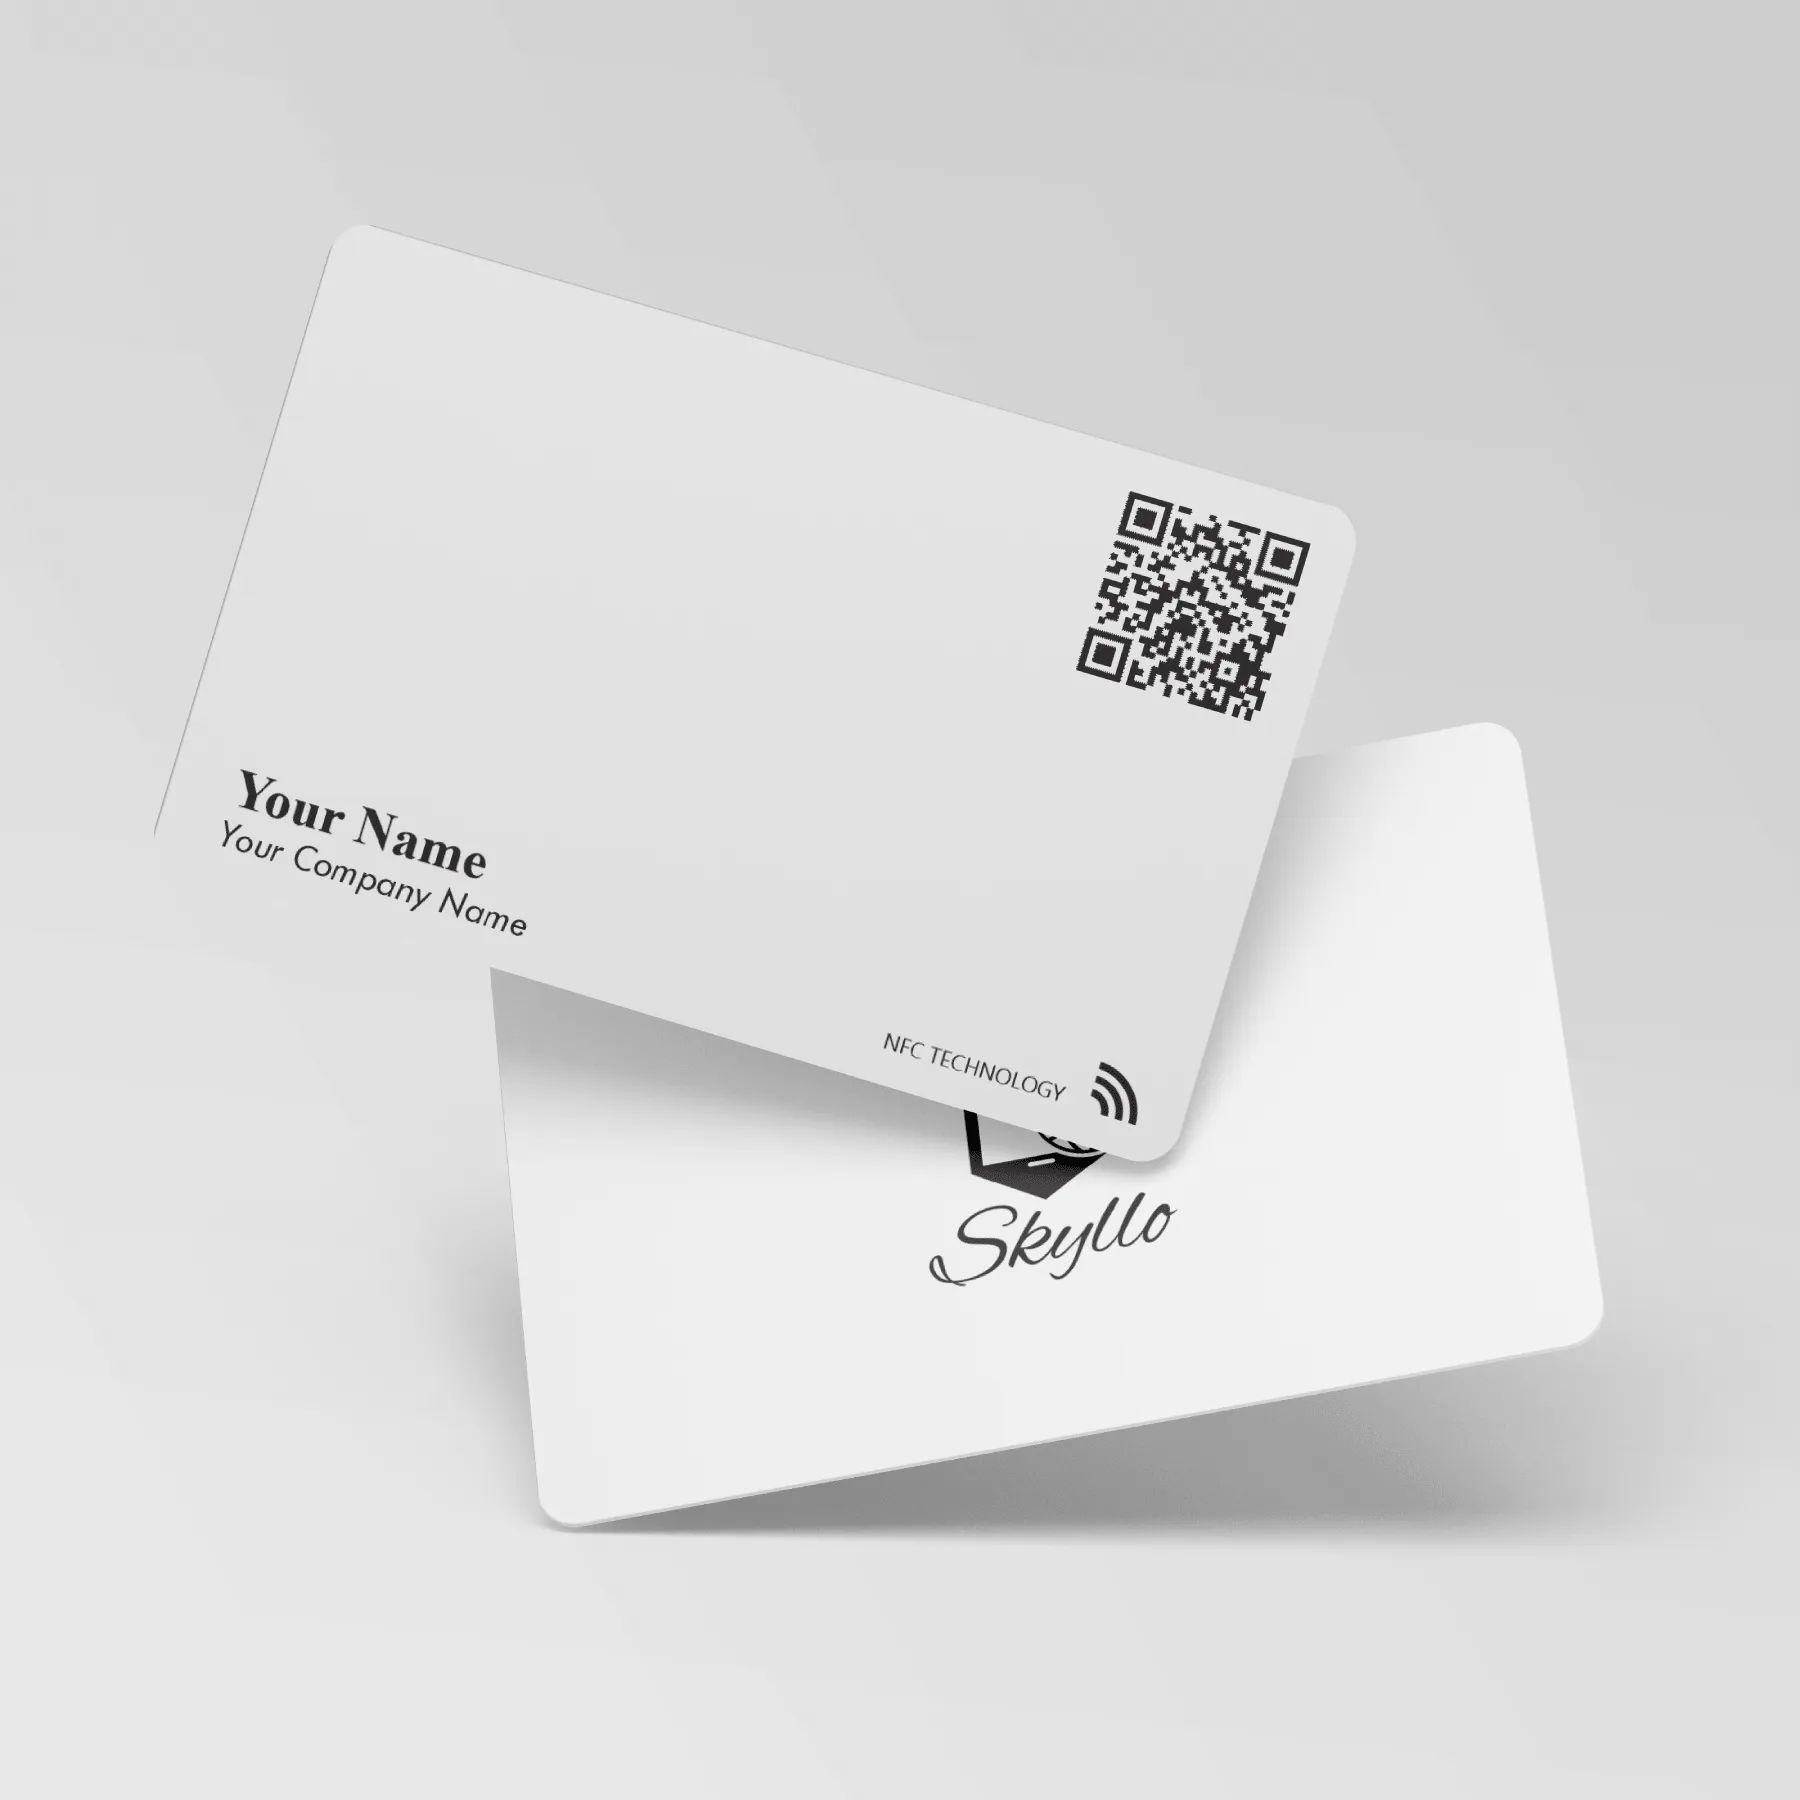 Digital White Card now available